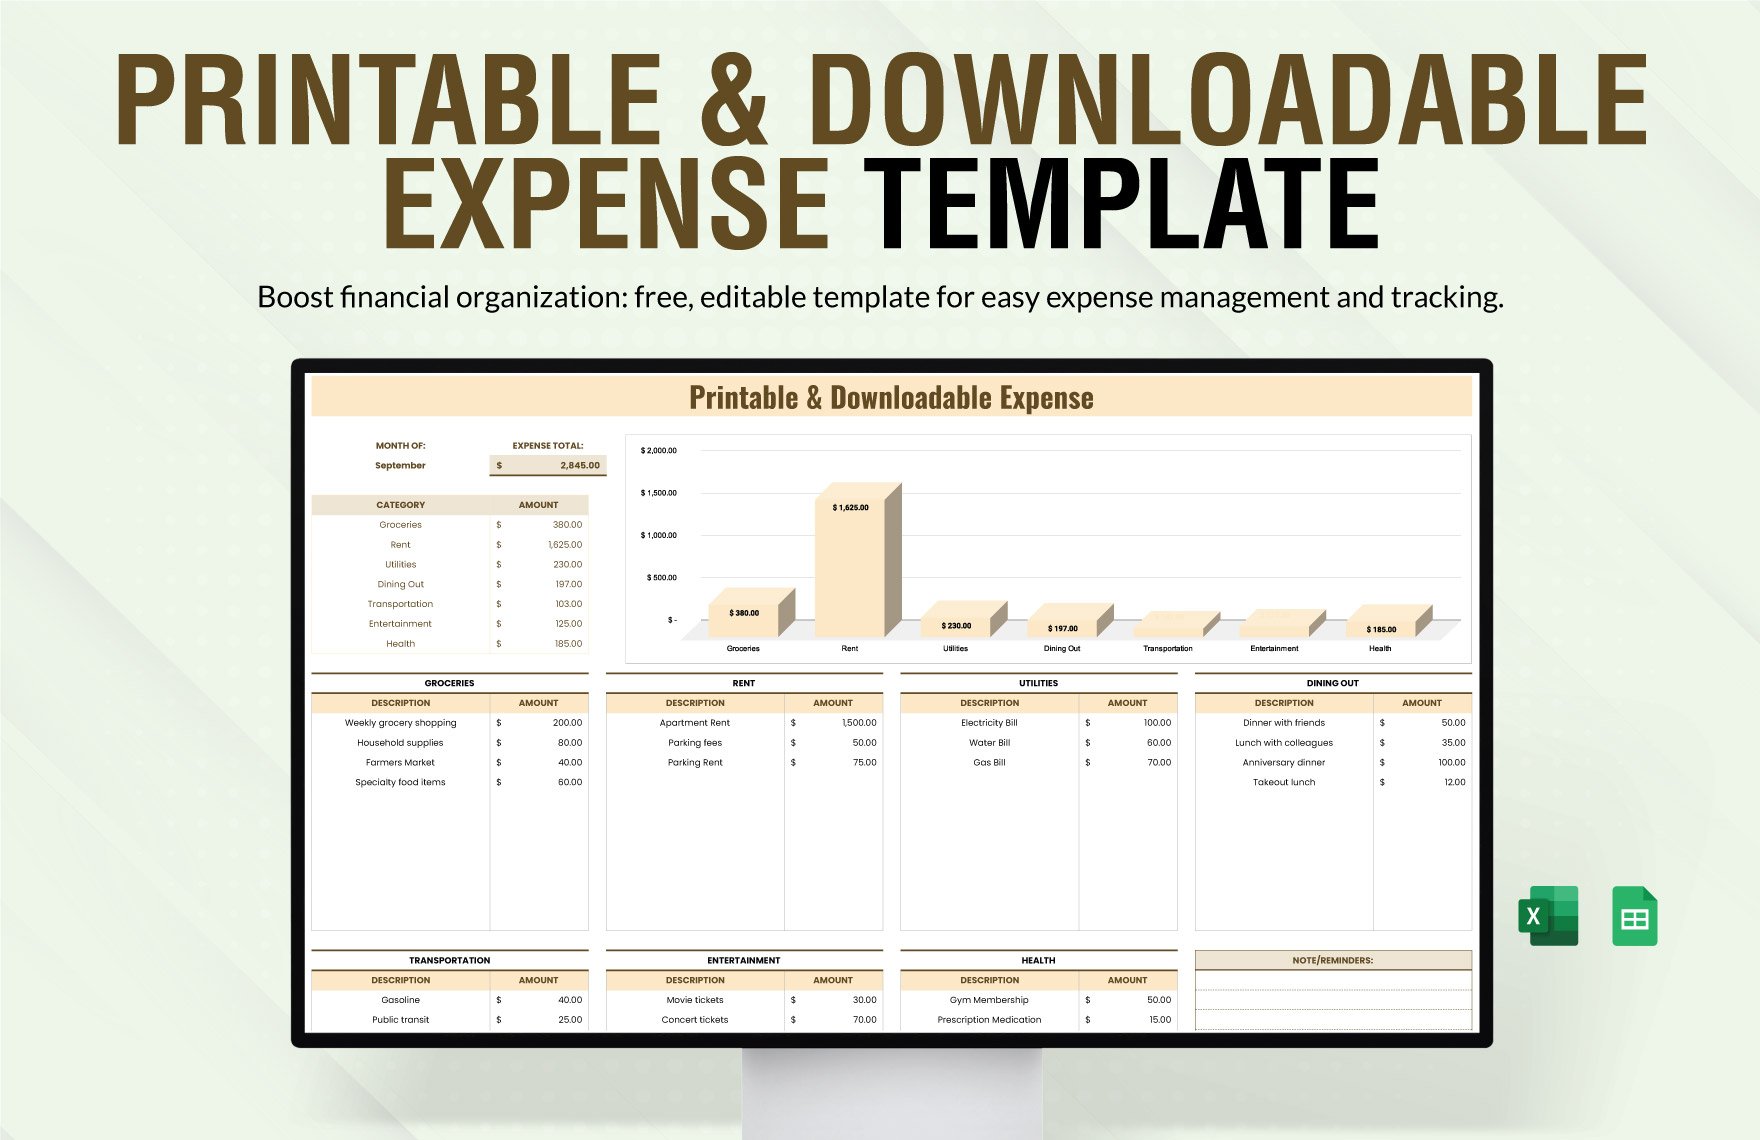 Printable & Downloadable Expense Template